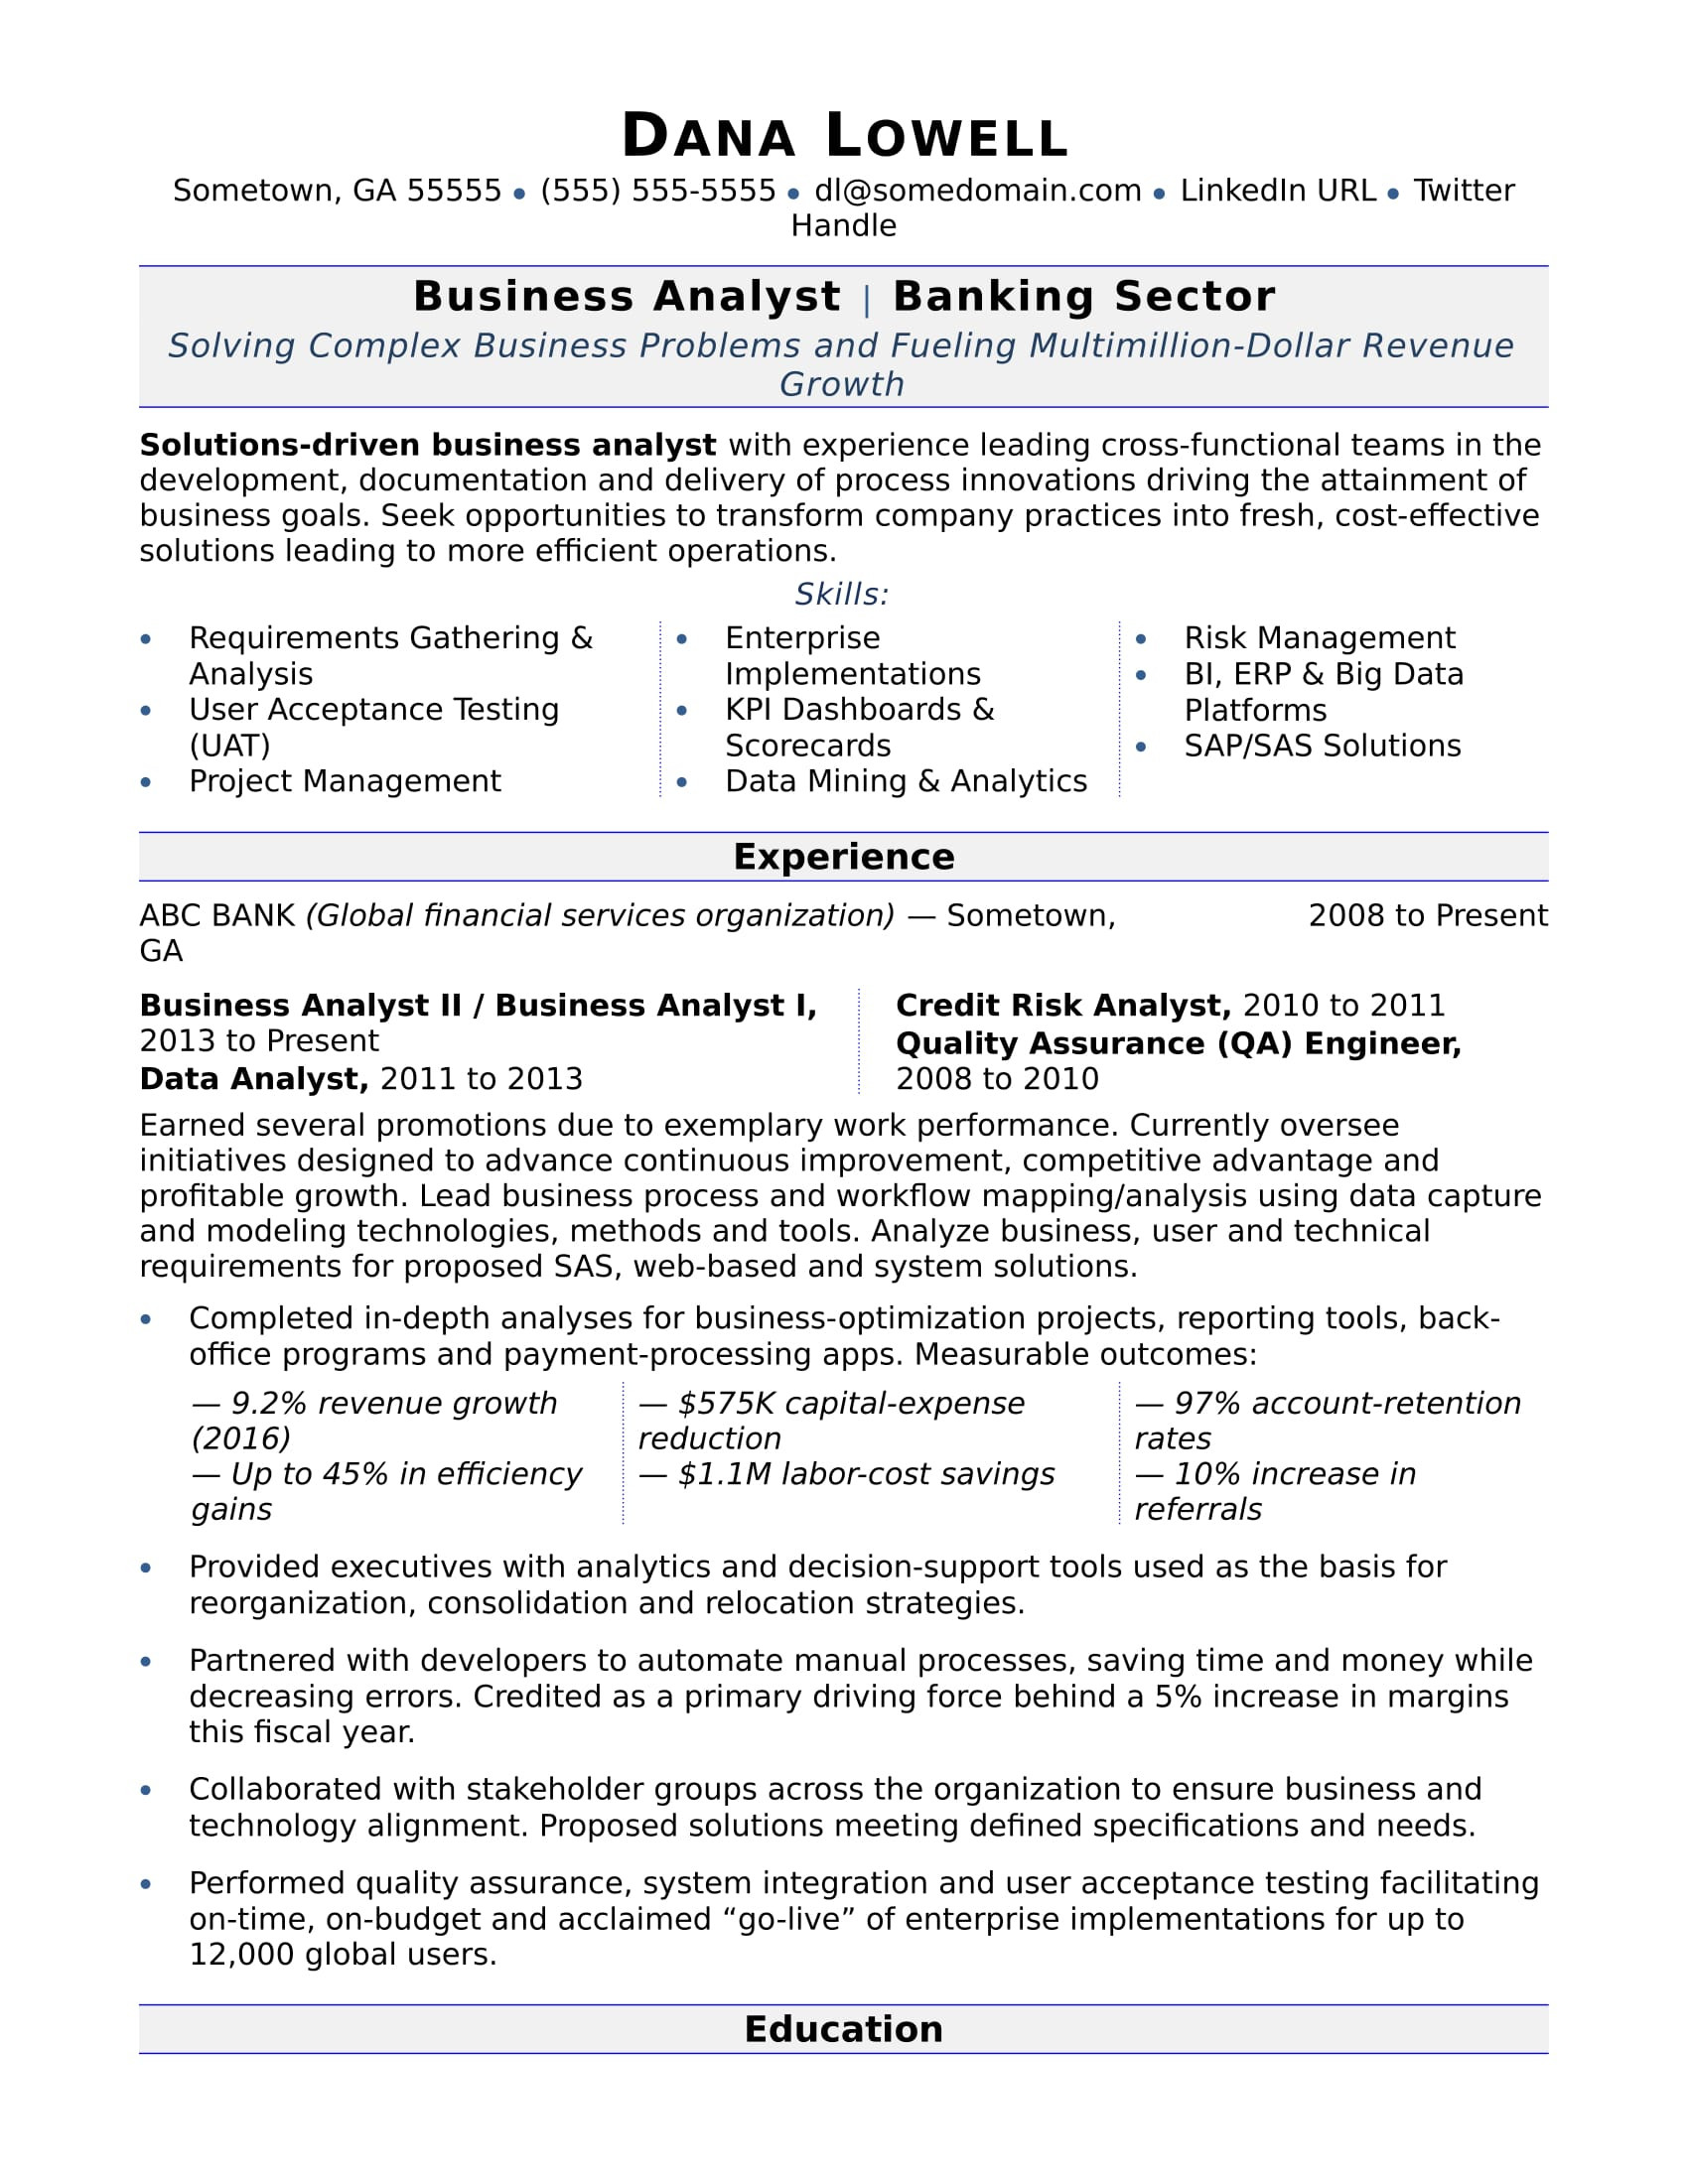 Resume Samples for Business System Analyst Business Analyst Resume Monster.com